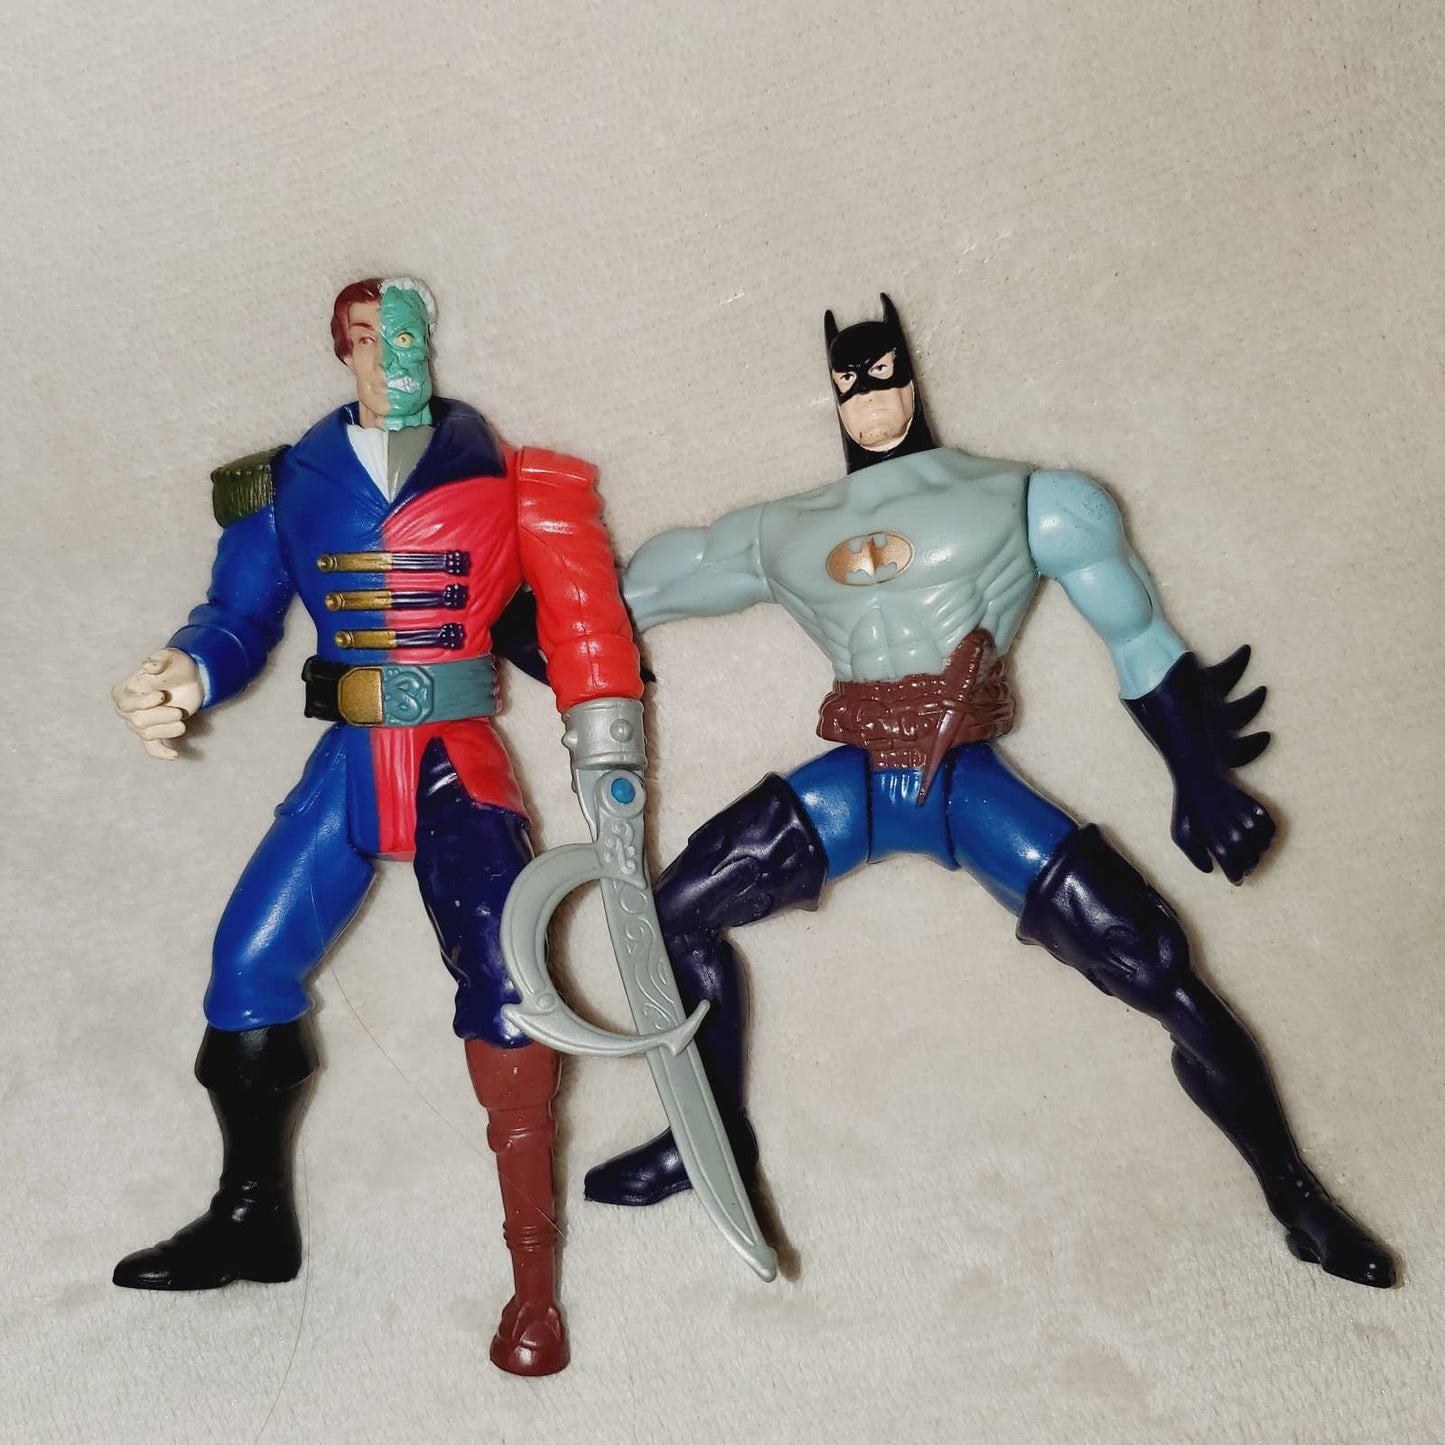 '94 Vintage Twisted Arm Kenner Toys Legends of Batman: Pirate Batman & Two-Face